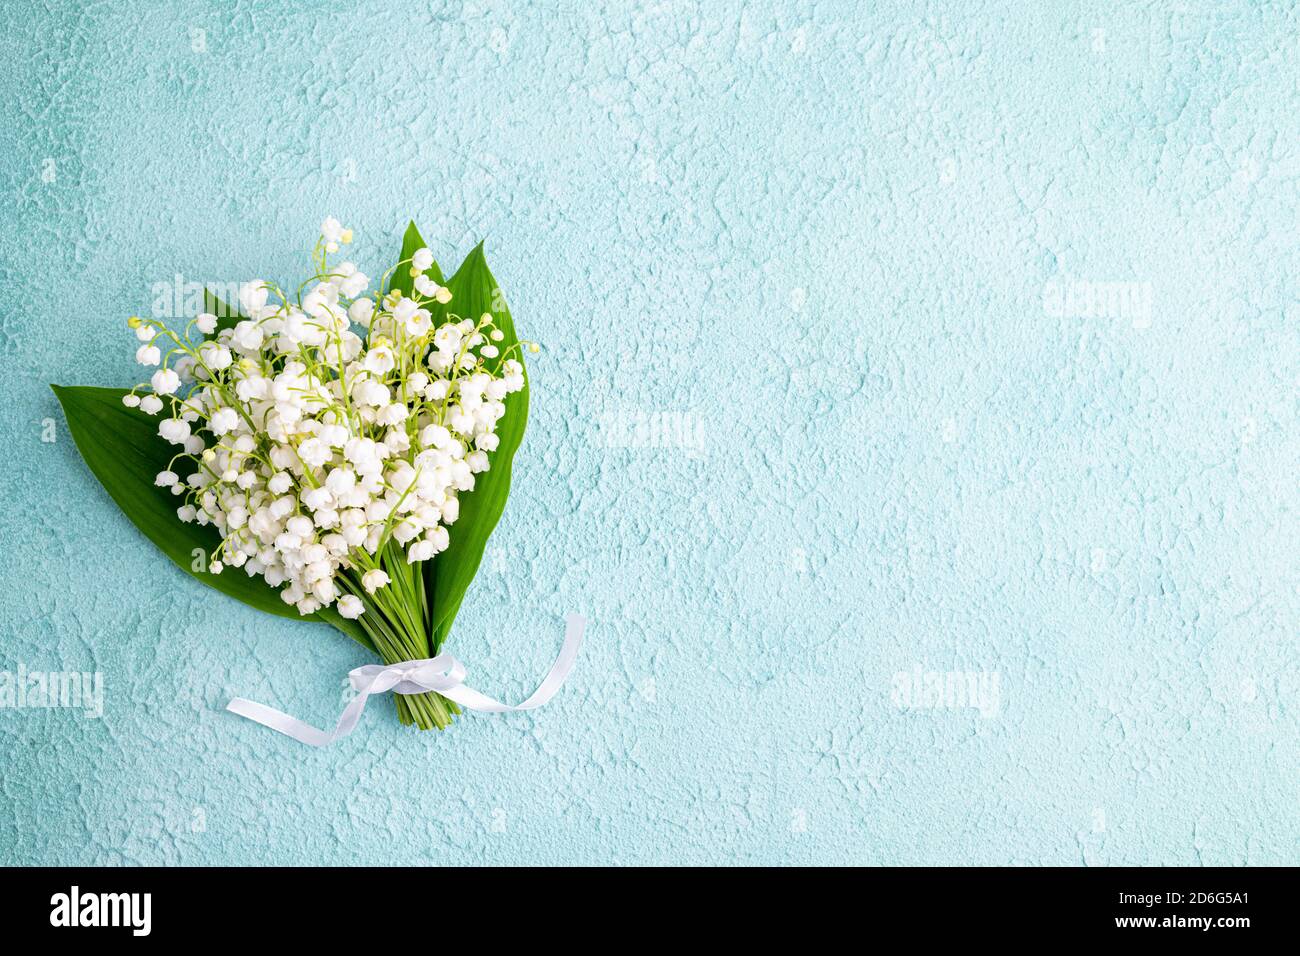 Bouquet of flowers lily of the valley on turquoise background flat lay, beautiful vintage card, top view. Spring, holidays, wedding concept. Copy spac Stock Photo